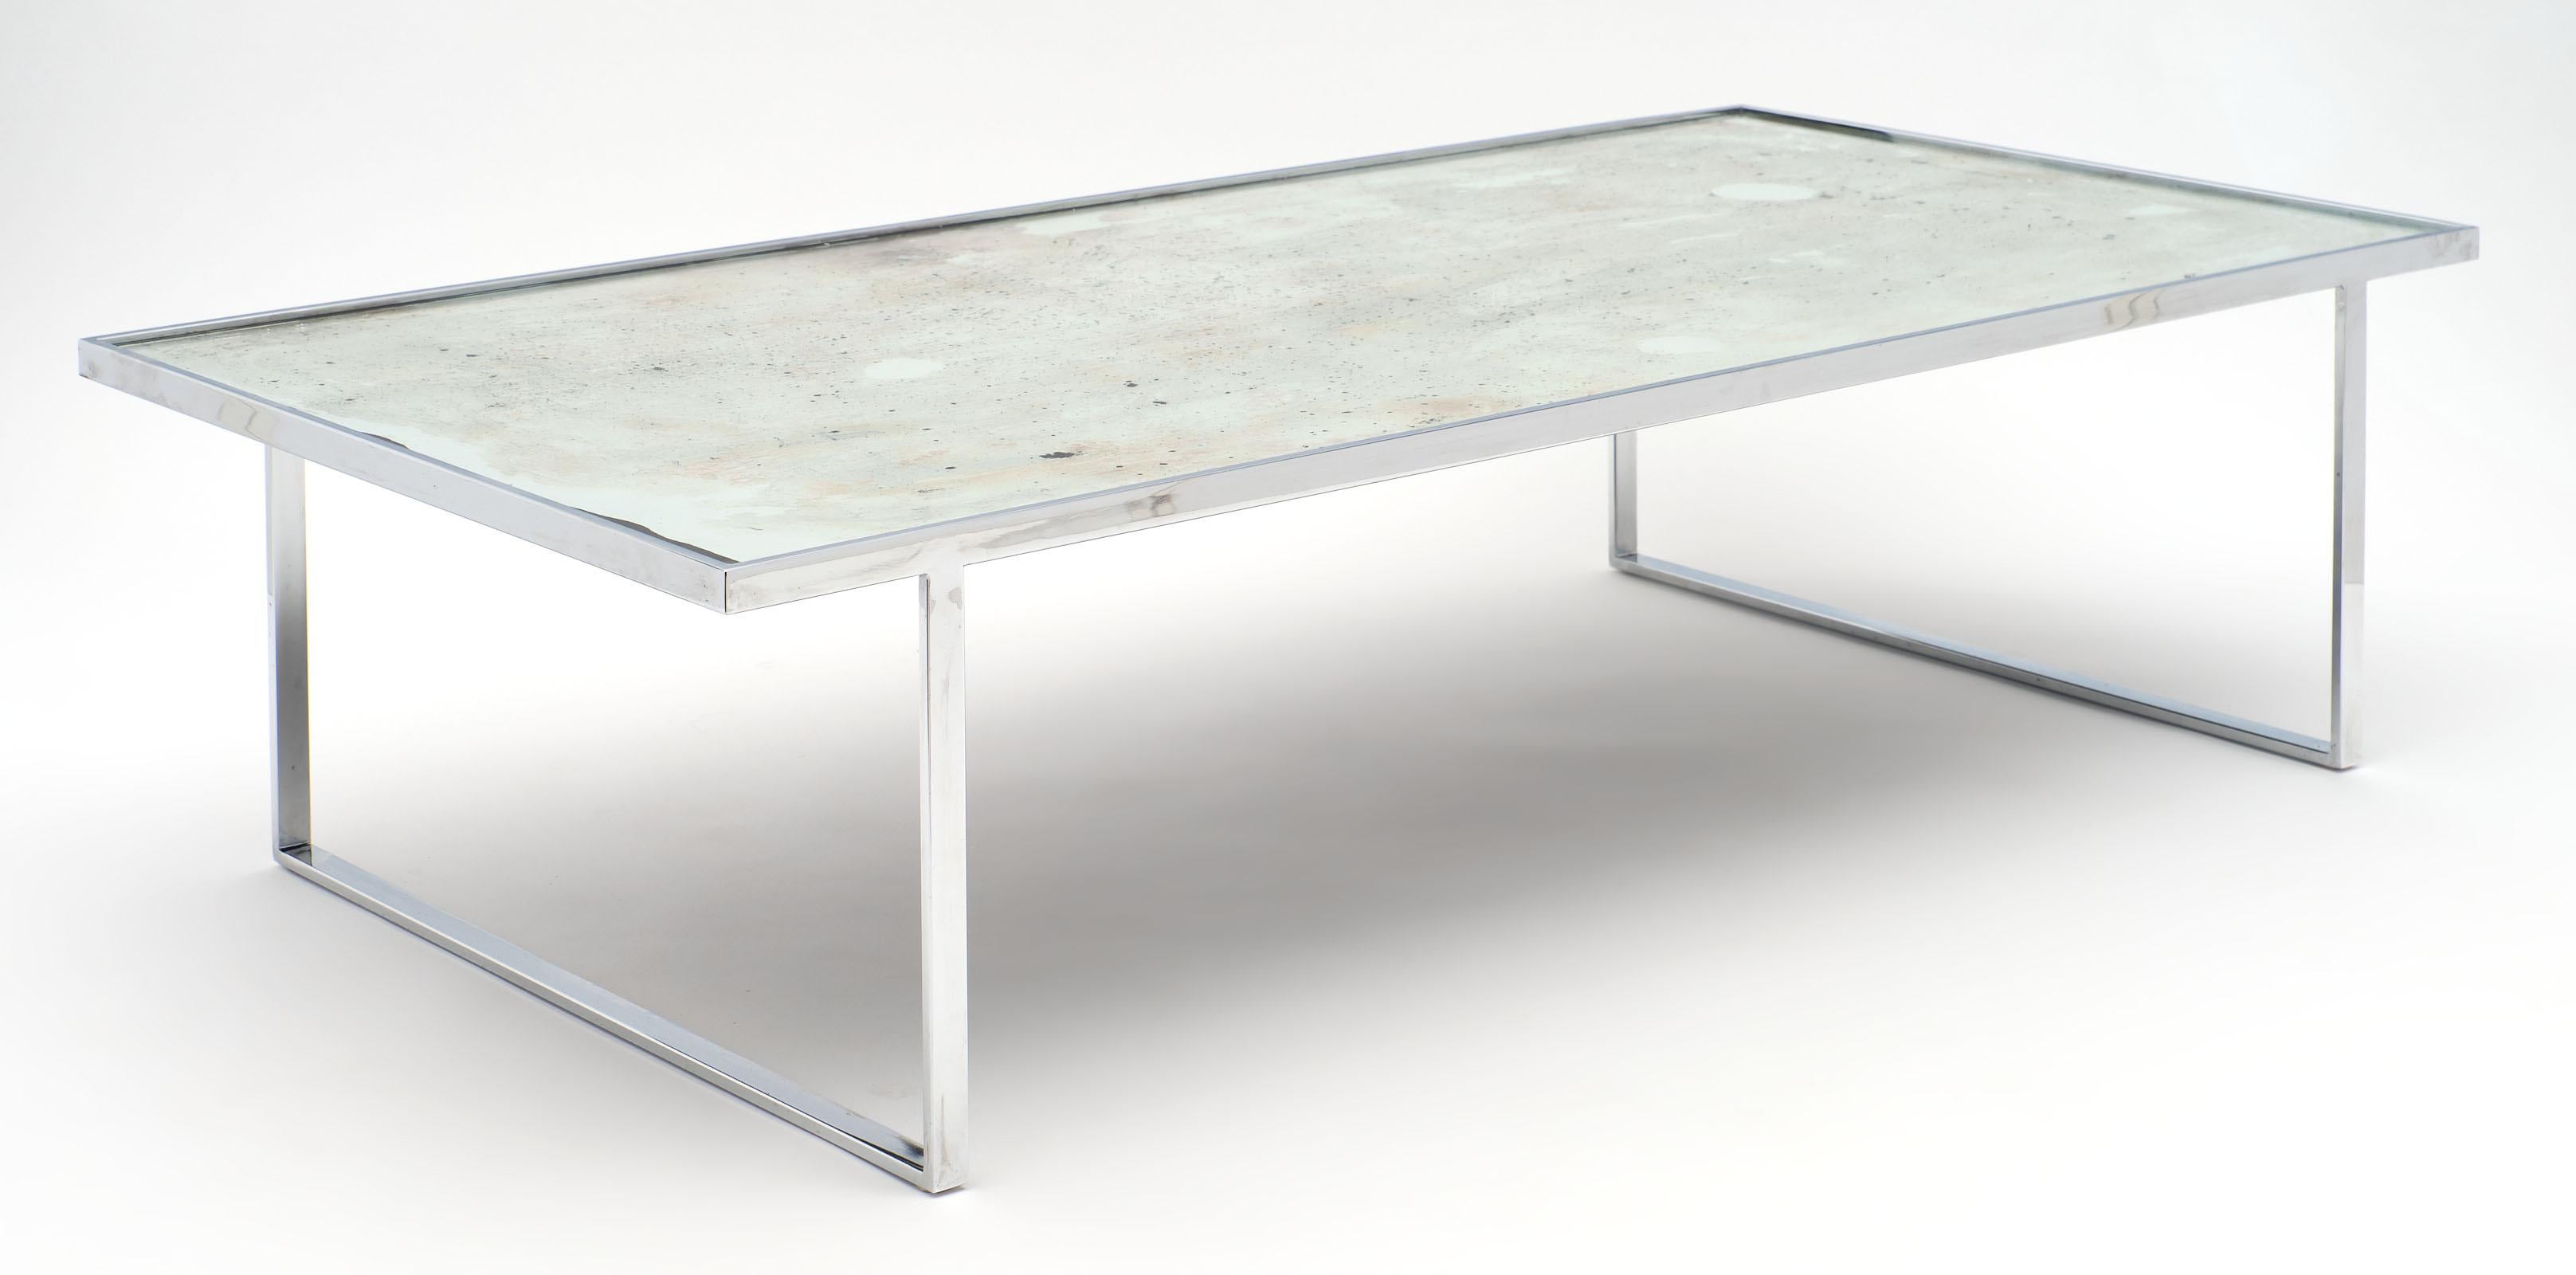 A French vintage chrome and glass coffee table featuring a tight chromed steel base topped with an antiqued mirrored top. This piece is elegant in its simplicity and strong in its construction.